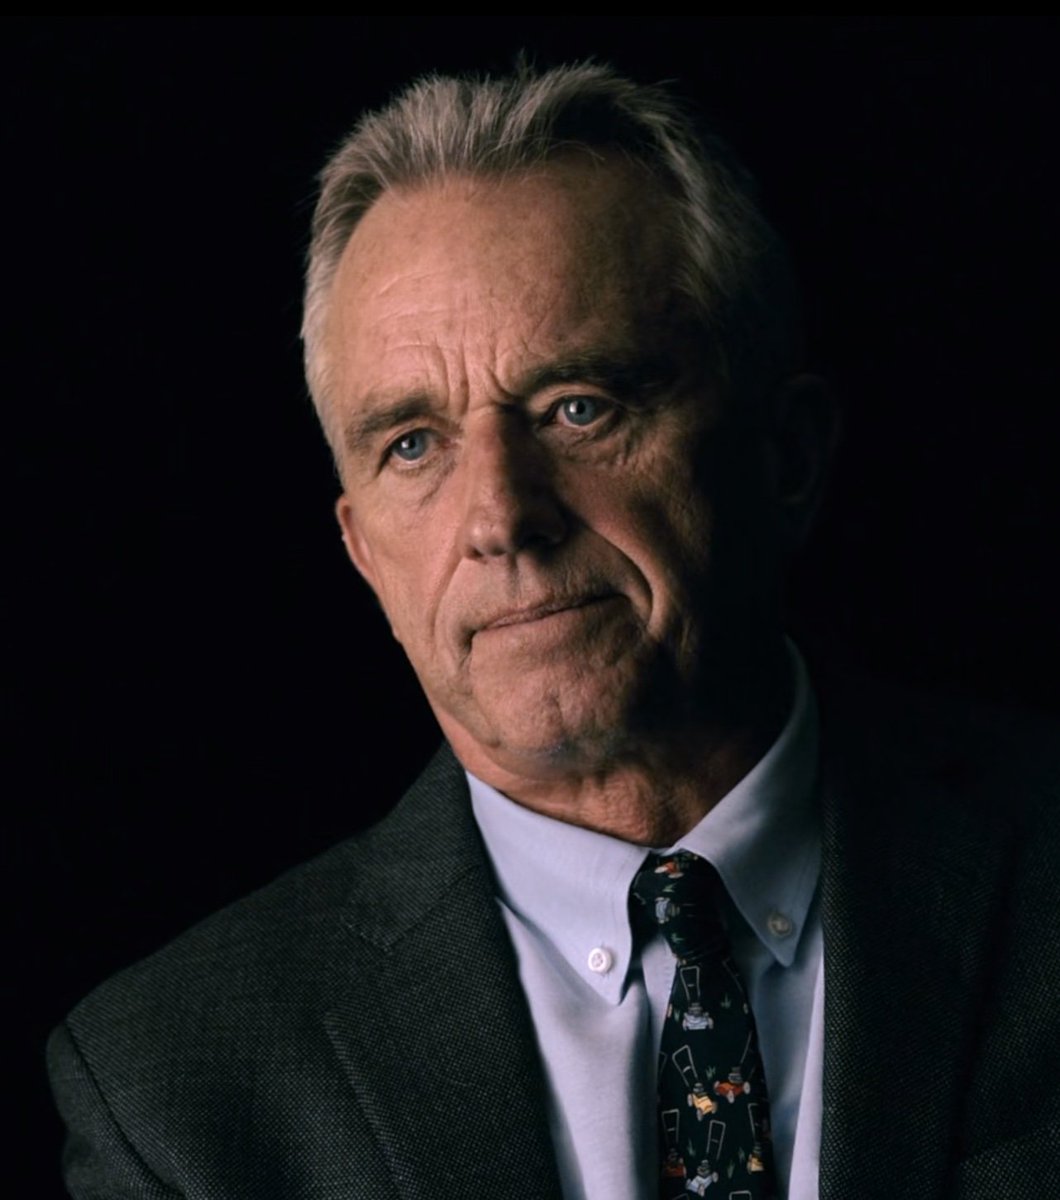 'My father blamed himself for going after the mob who, he believed, in retaliation, had killed his brother. He didn't come to realize until later that the mob and the CIA were, in fact, one entity.' - @RobertKennedyJr